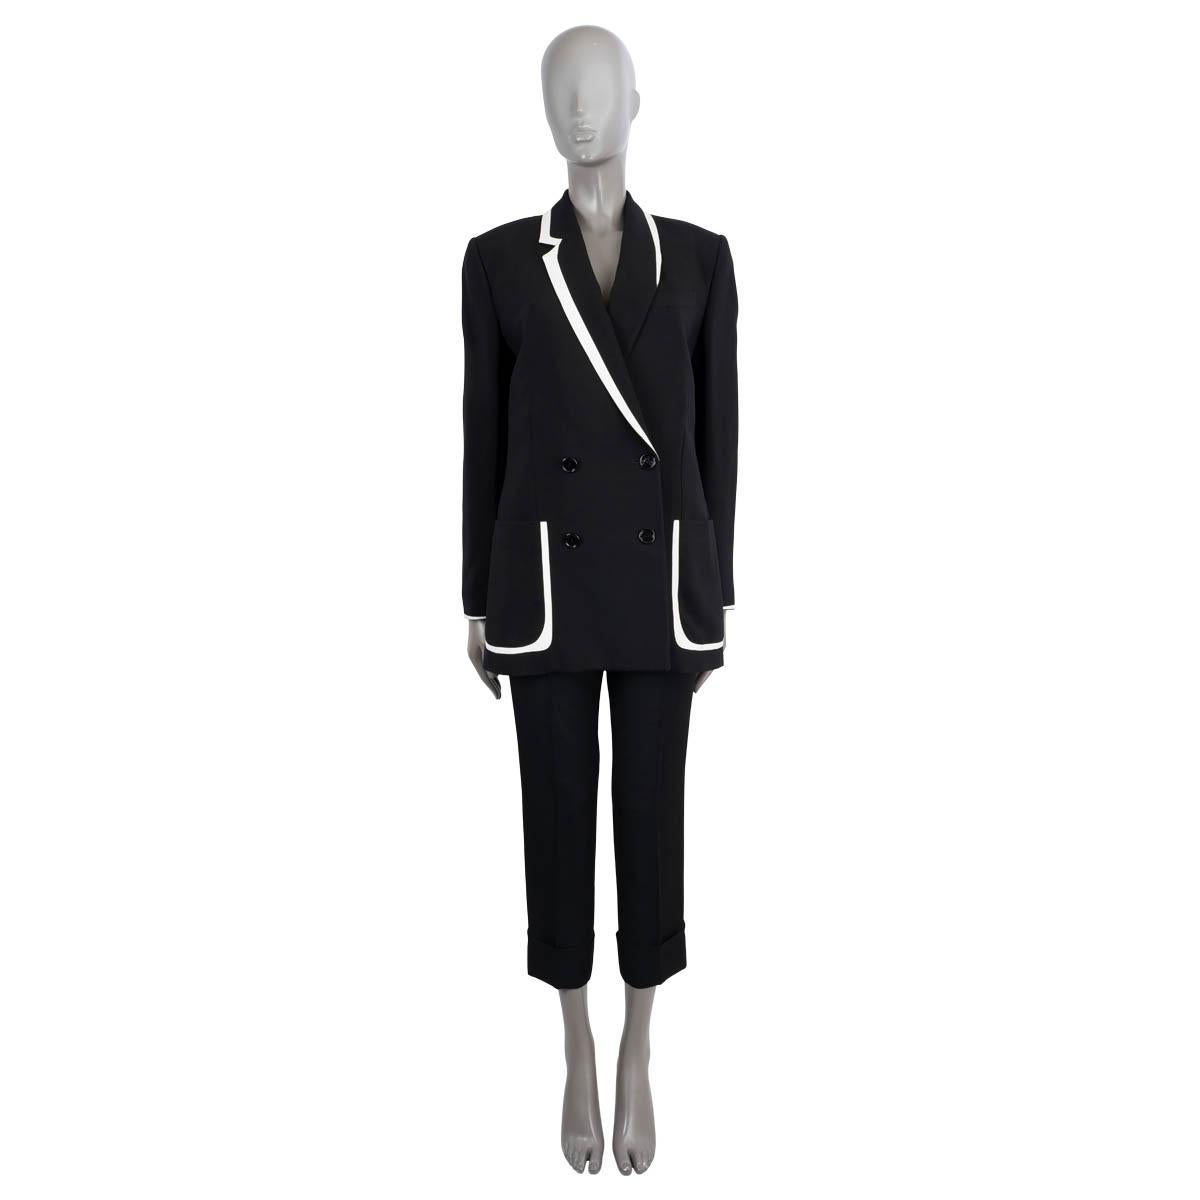 100% authentic Fendi x Joshua Vides double-breasted tuxedo blazer in black viscose (100%). Features asymmetric contrast piping in white lambskin leather, notch lapel, a chest pocket and two patch pockets on the front. Closes with buttons on the